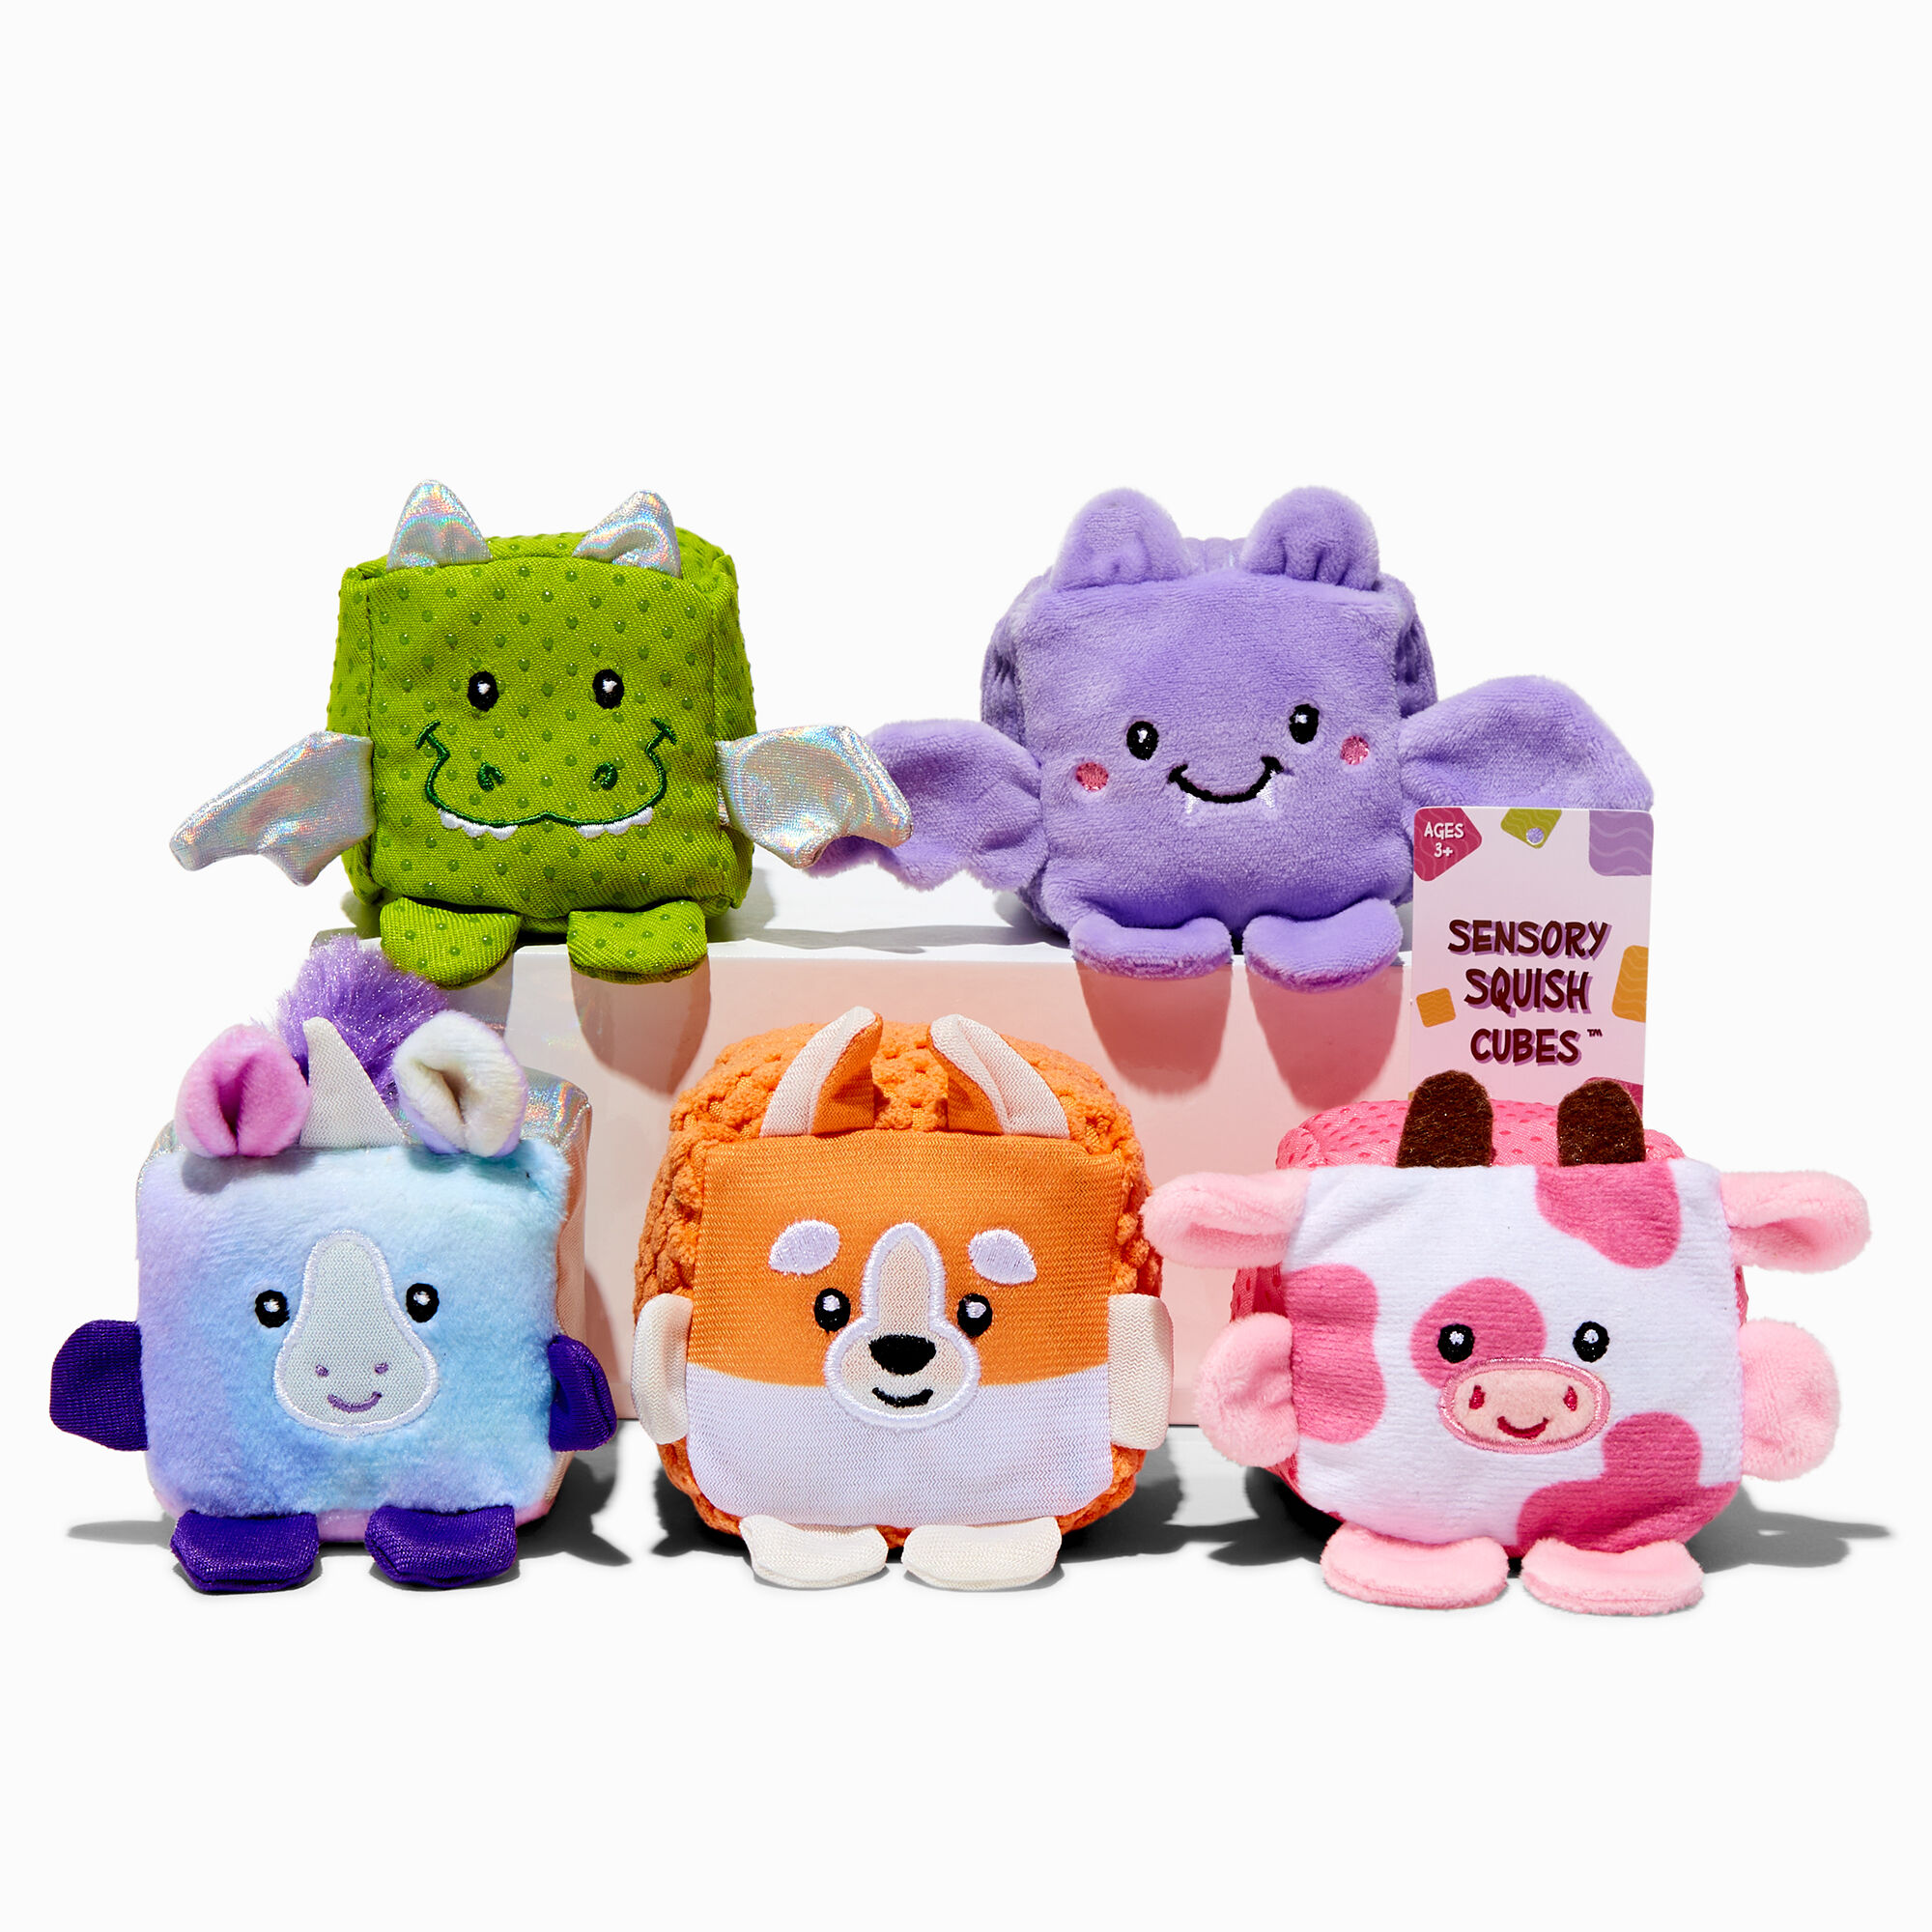 View Claires Sensory Squish Cubes 4 Plush Toy Styles May Vary information